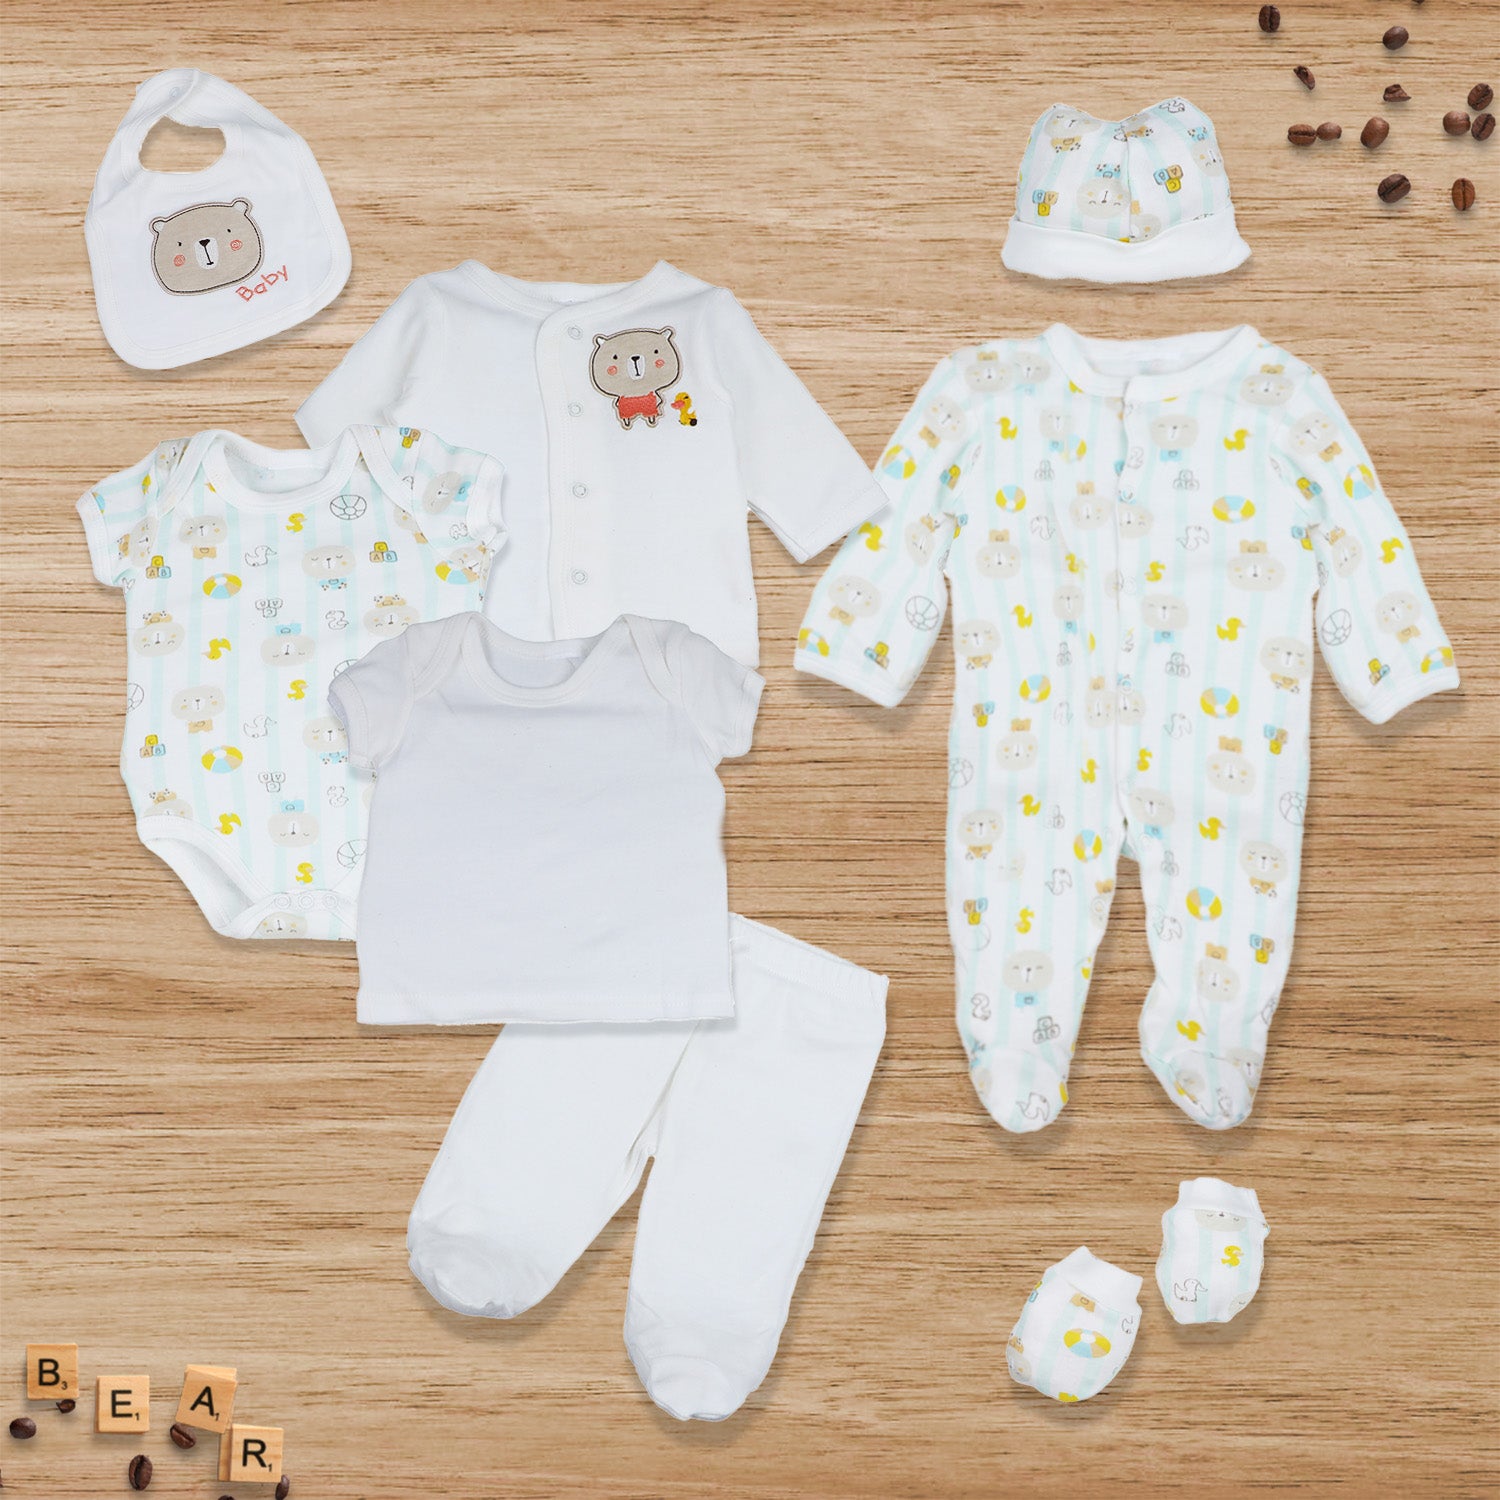 Baby Moo Cute Animal Embroidered Cotton Infant Essentials 8 pcs Romper Gift Set - White - Baby Moo